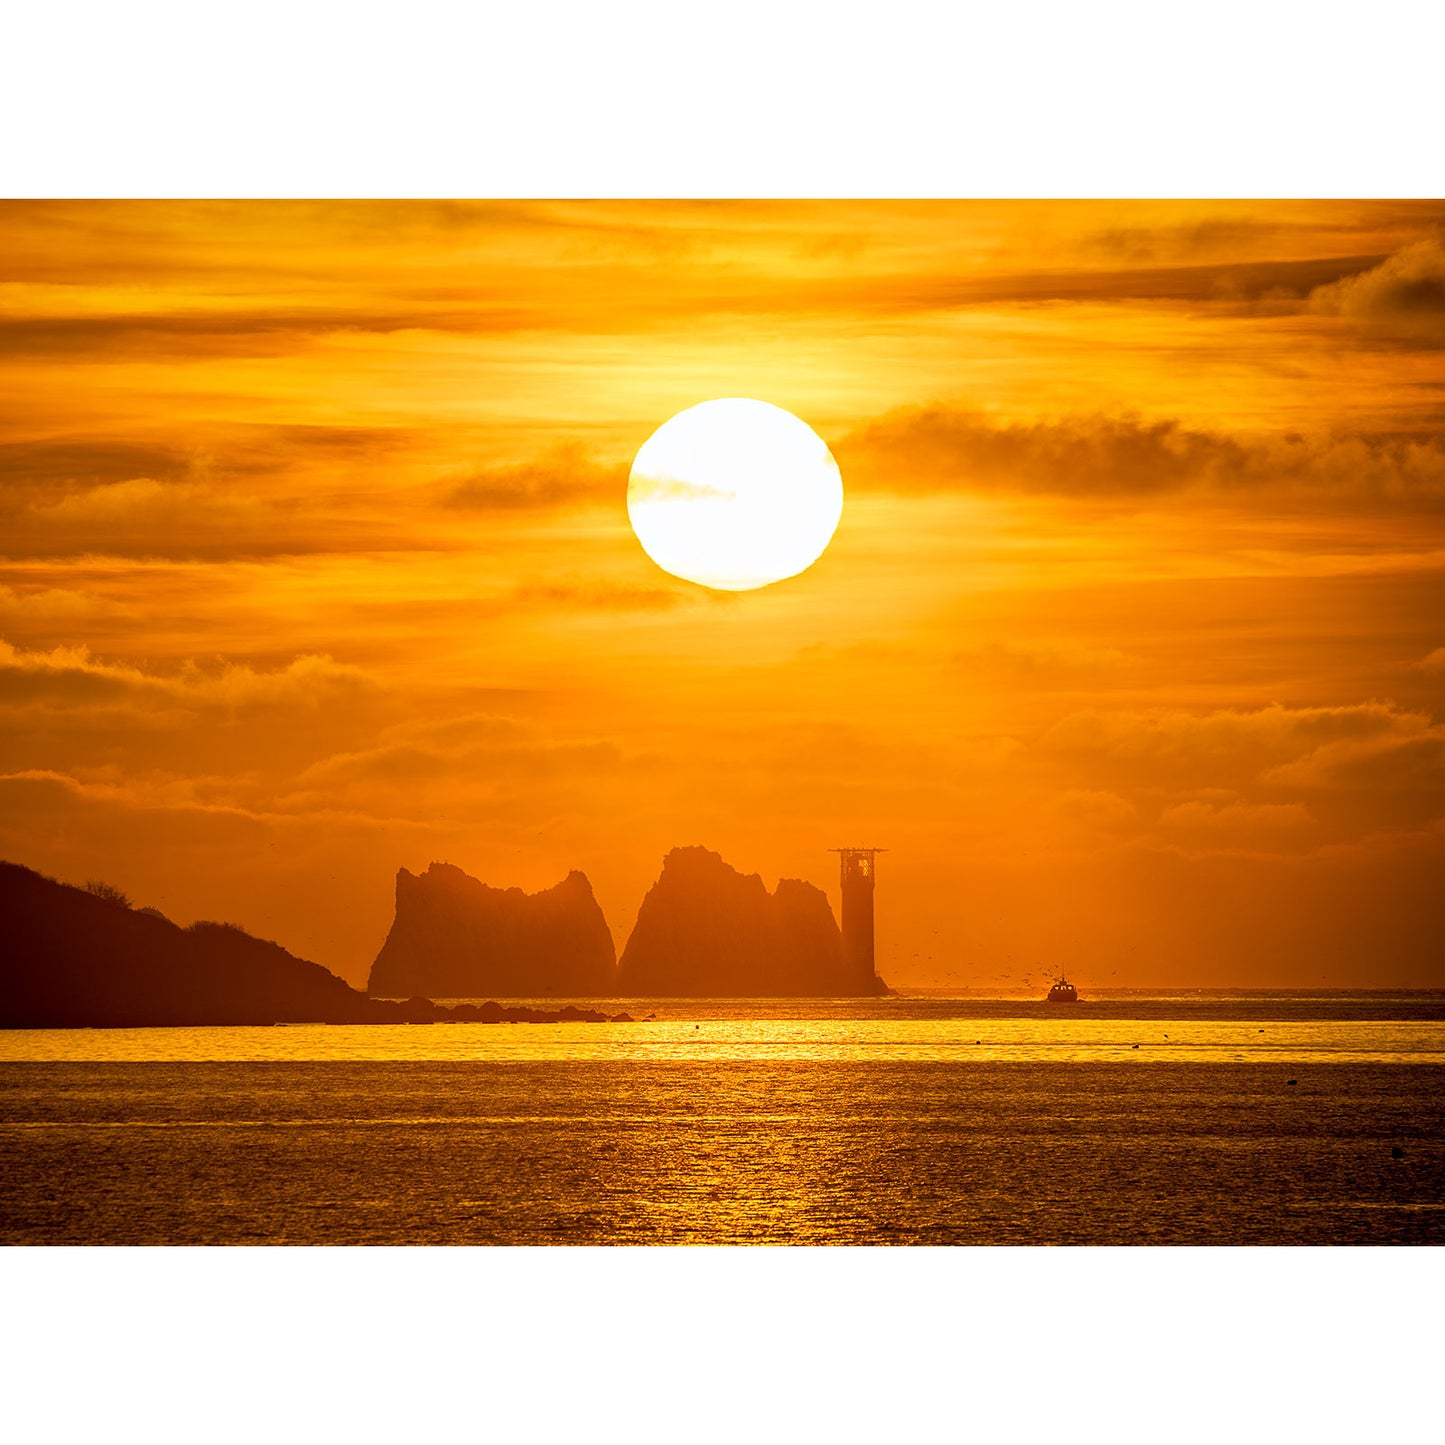 A Sunset over The Needles with silhouettes of cliffs, a lighthouse on the Isle of Wight, and a boat in the foreground by Available Light Photography.